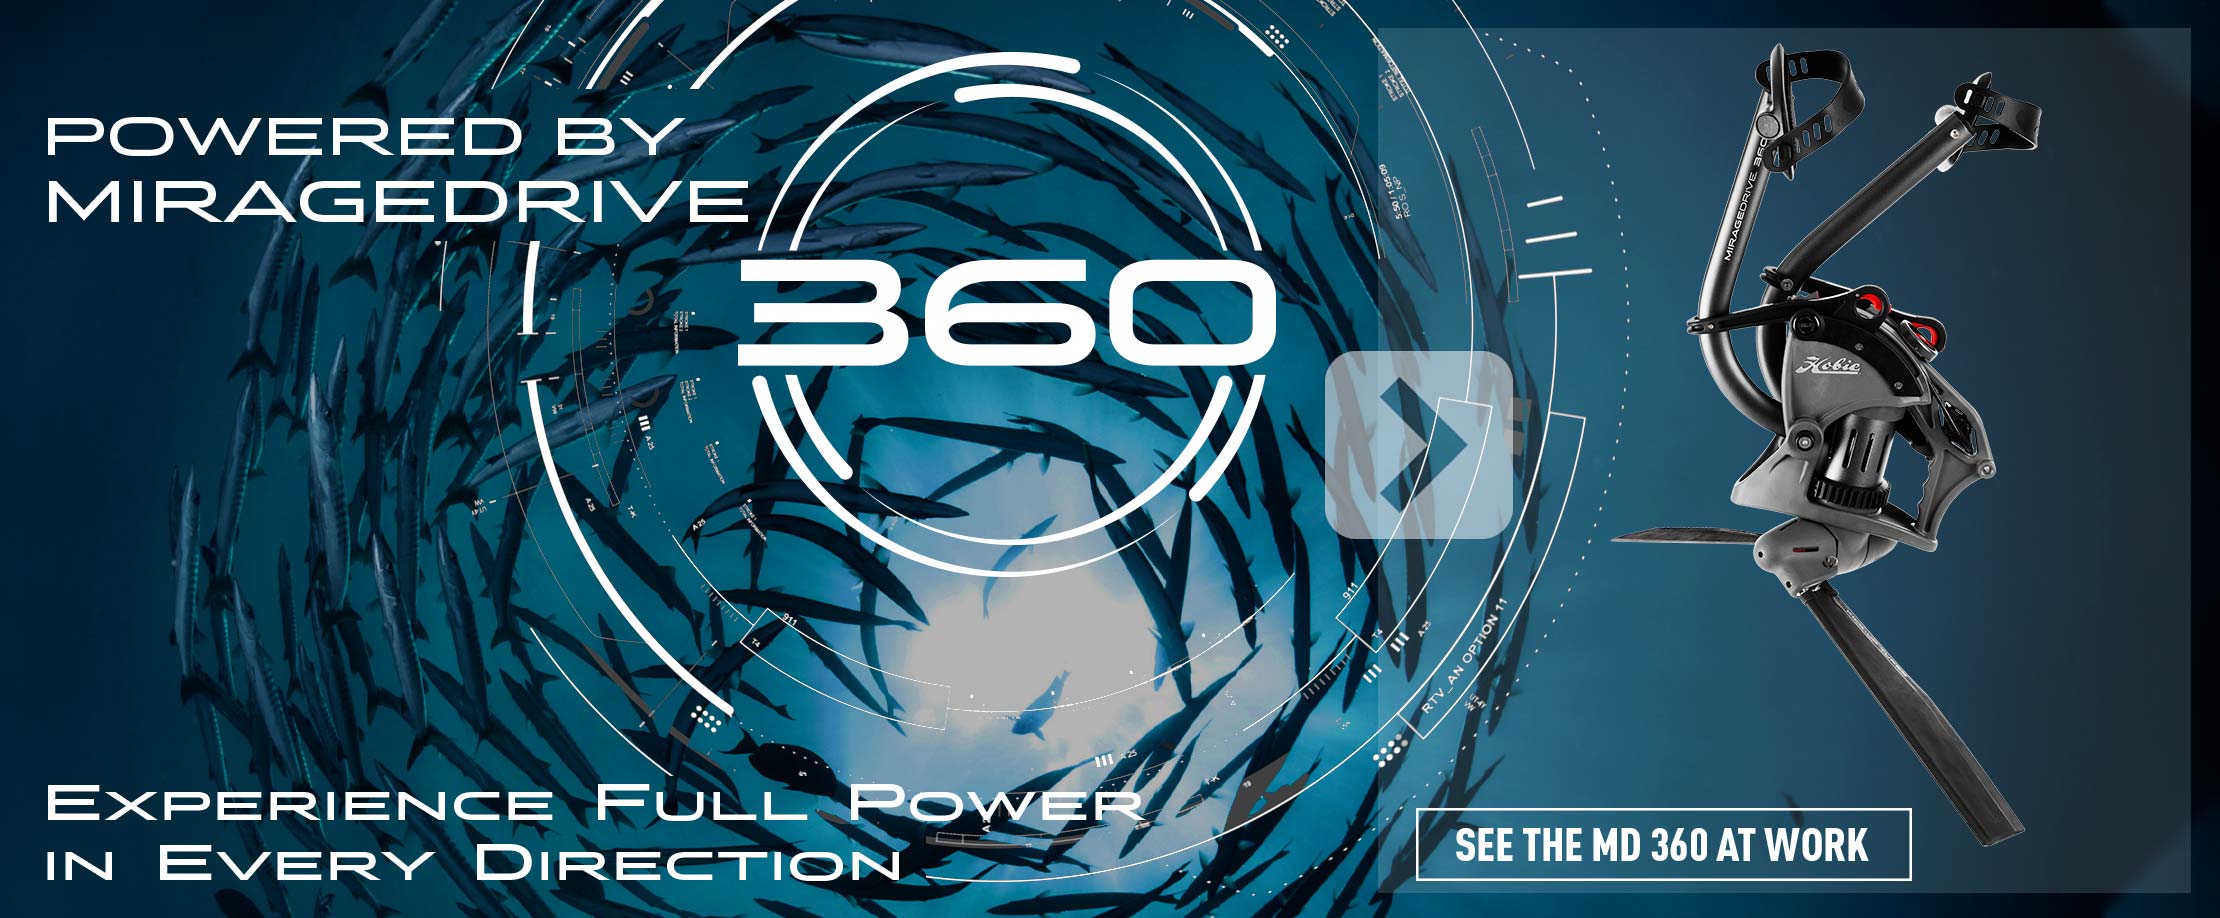 Powered By MirageDrive 360